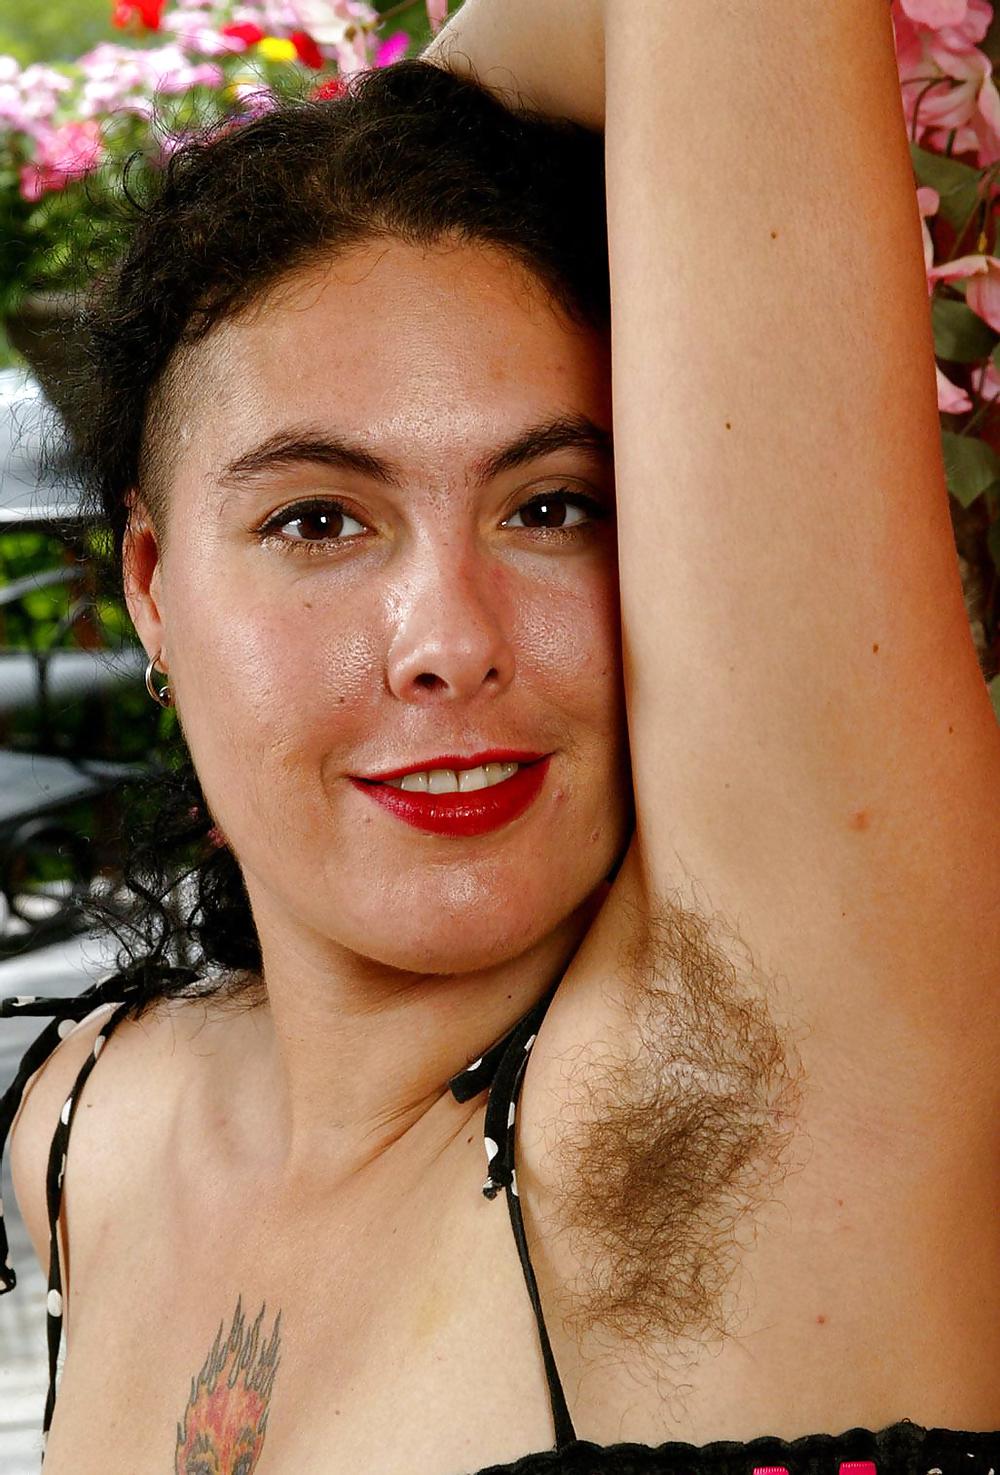 Miscellaneous girls showing hairy, unshaven armpits 5 #35783571